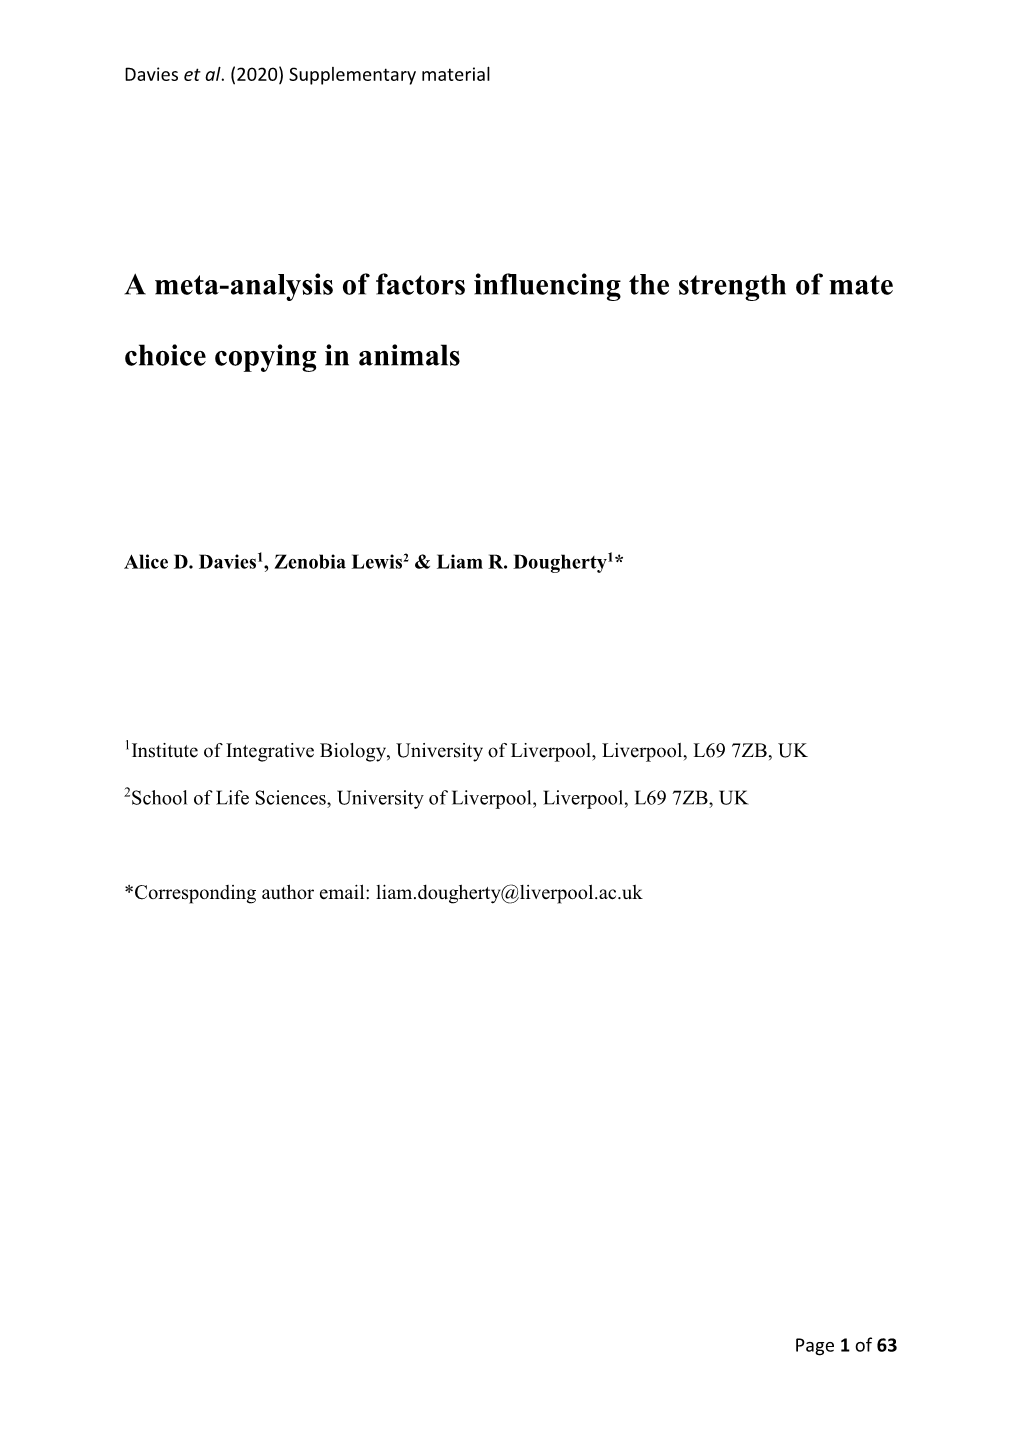 A Meta-Analysis of Factors Influencing the Strength of Mate Choice Copying in Animals